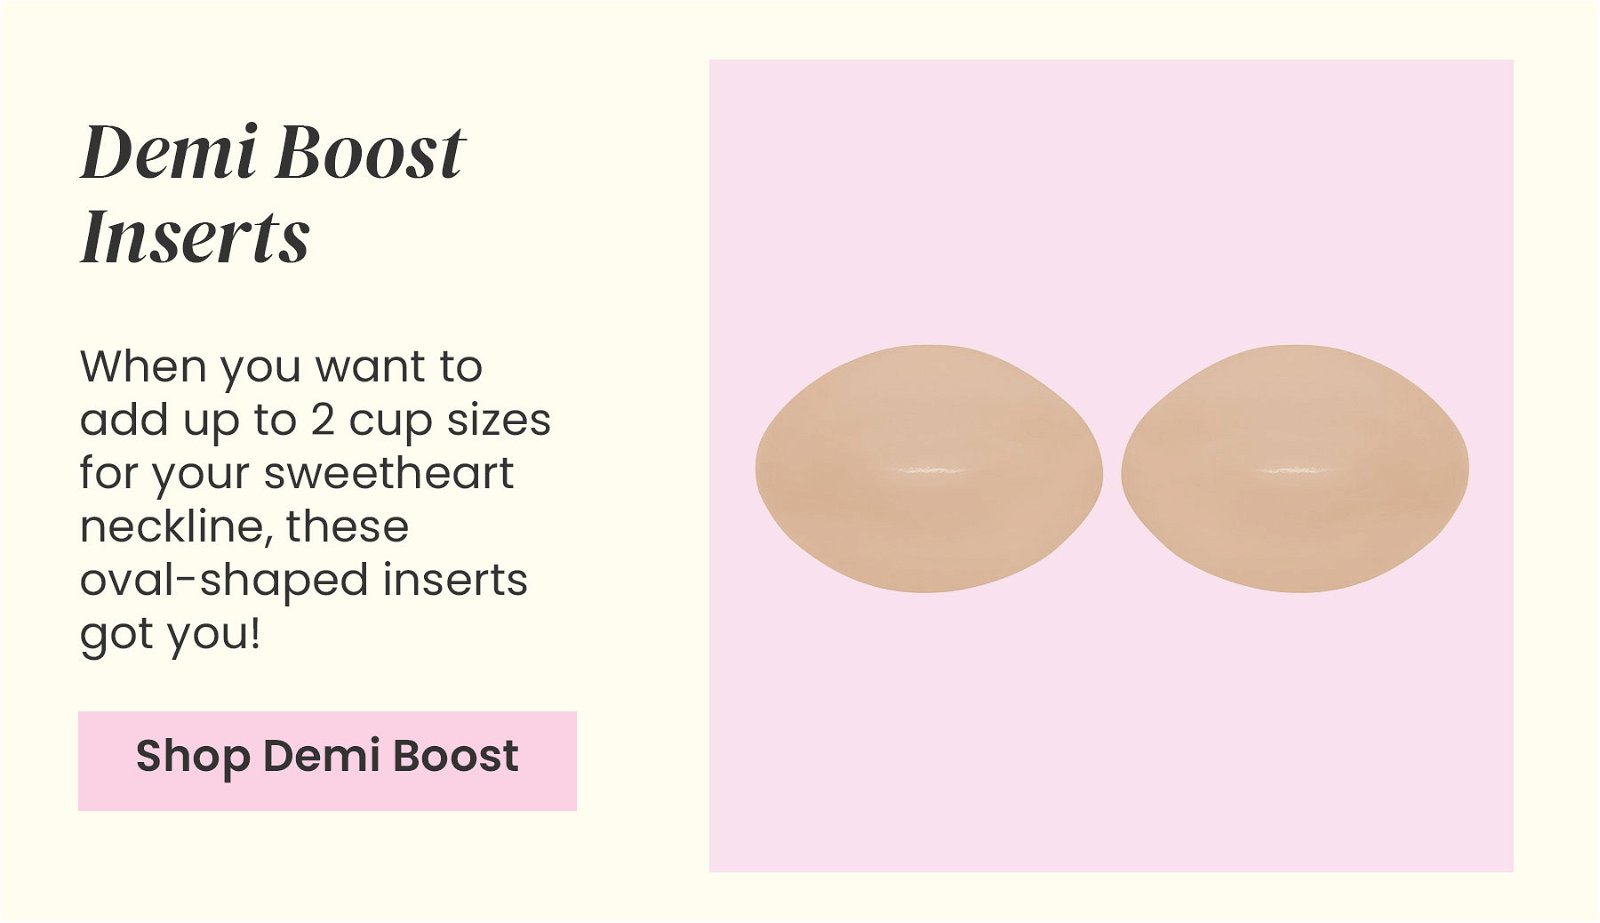 No photoshop necessary! Our Demi Boost Inserts are bestsellers for a reason  🤩